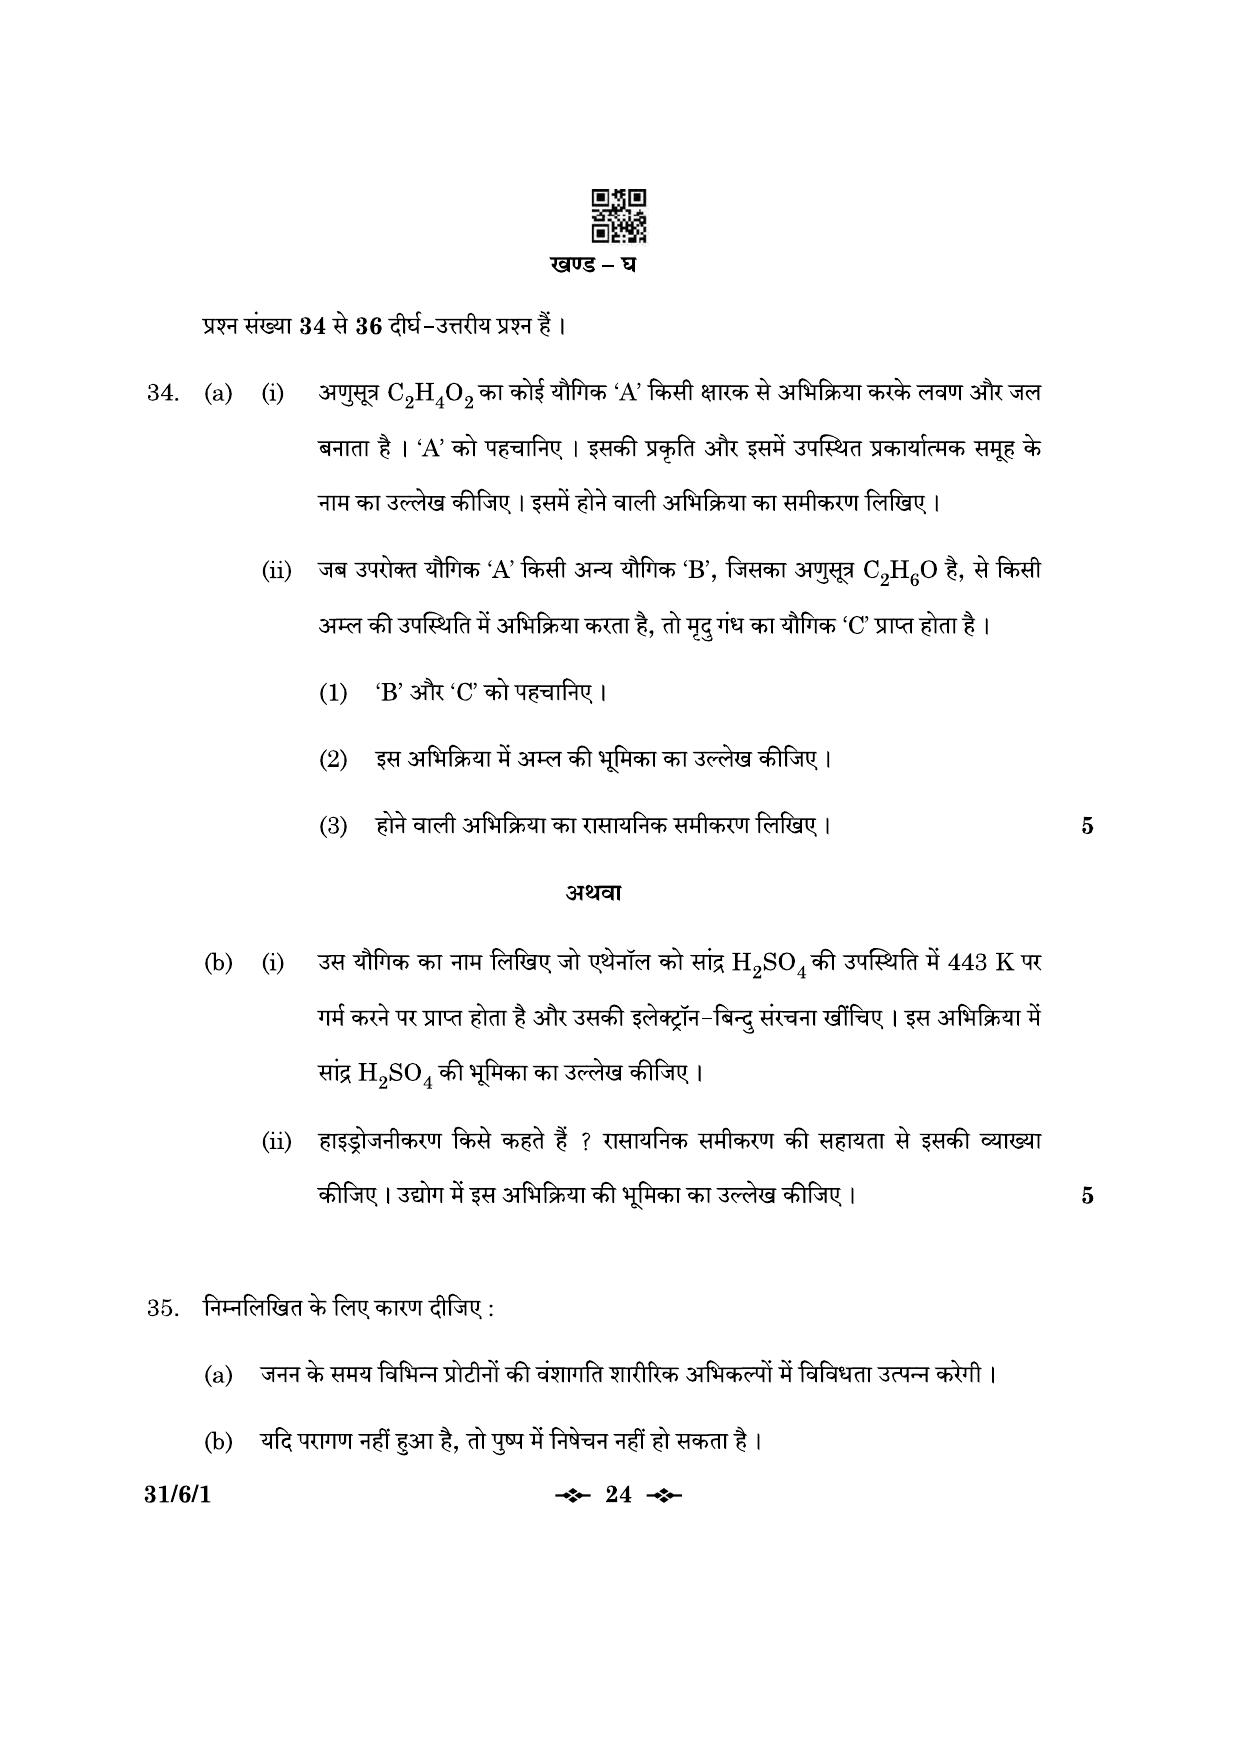 CBSE Class 10 31-6-1 Science 2023 Question Paper - Page 24